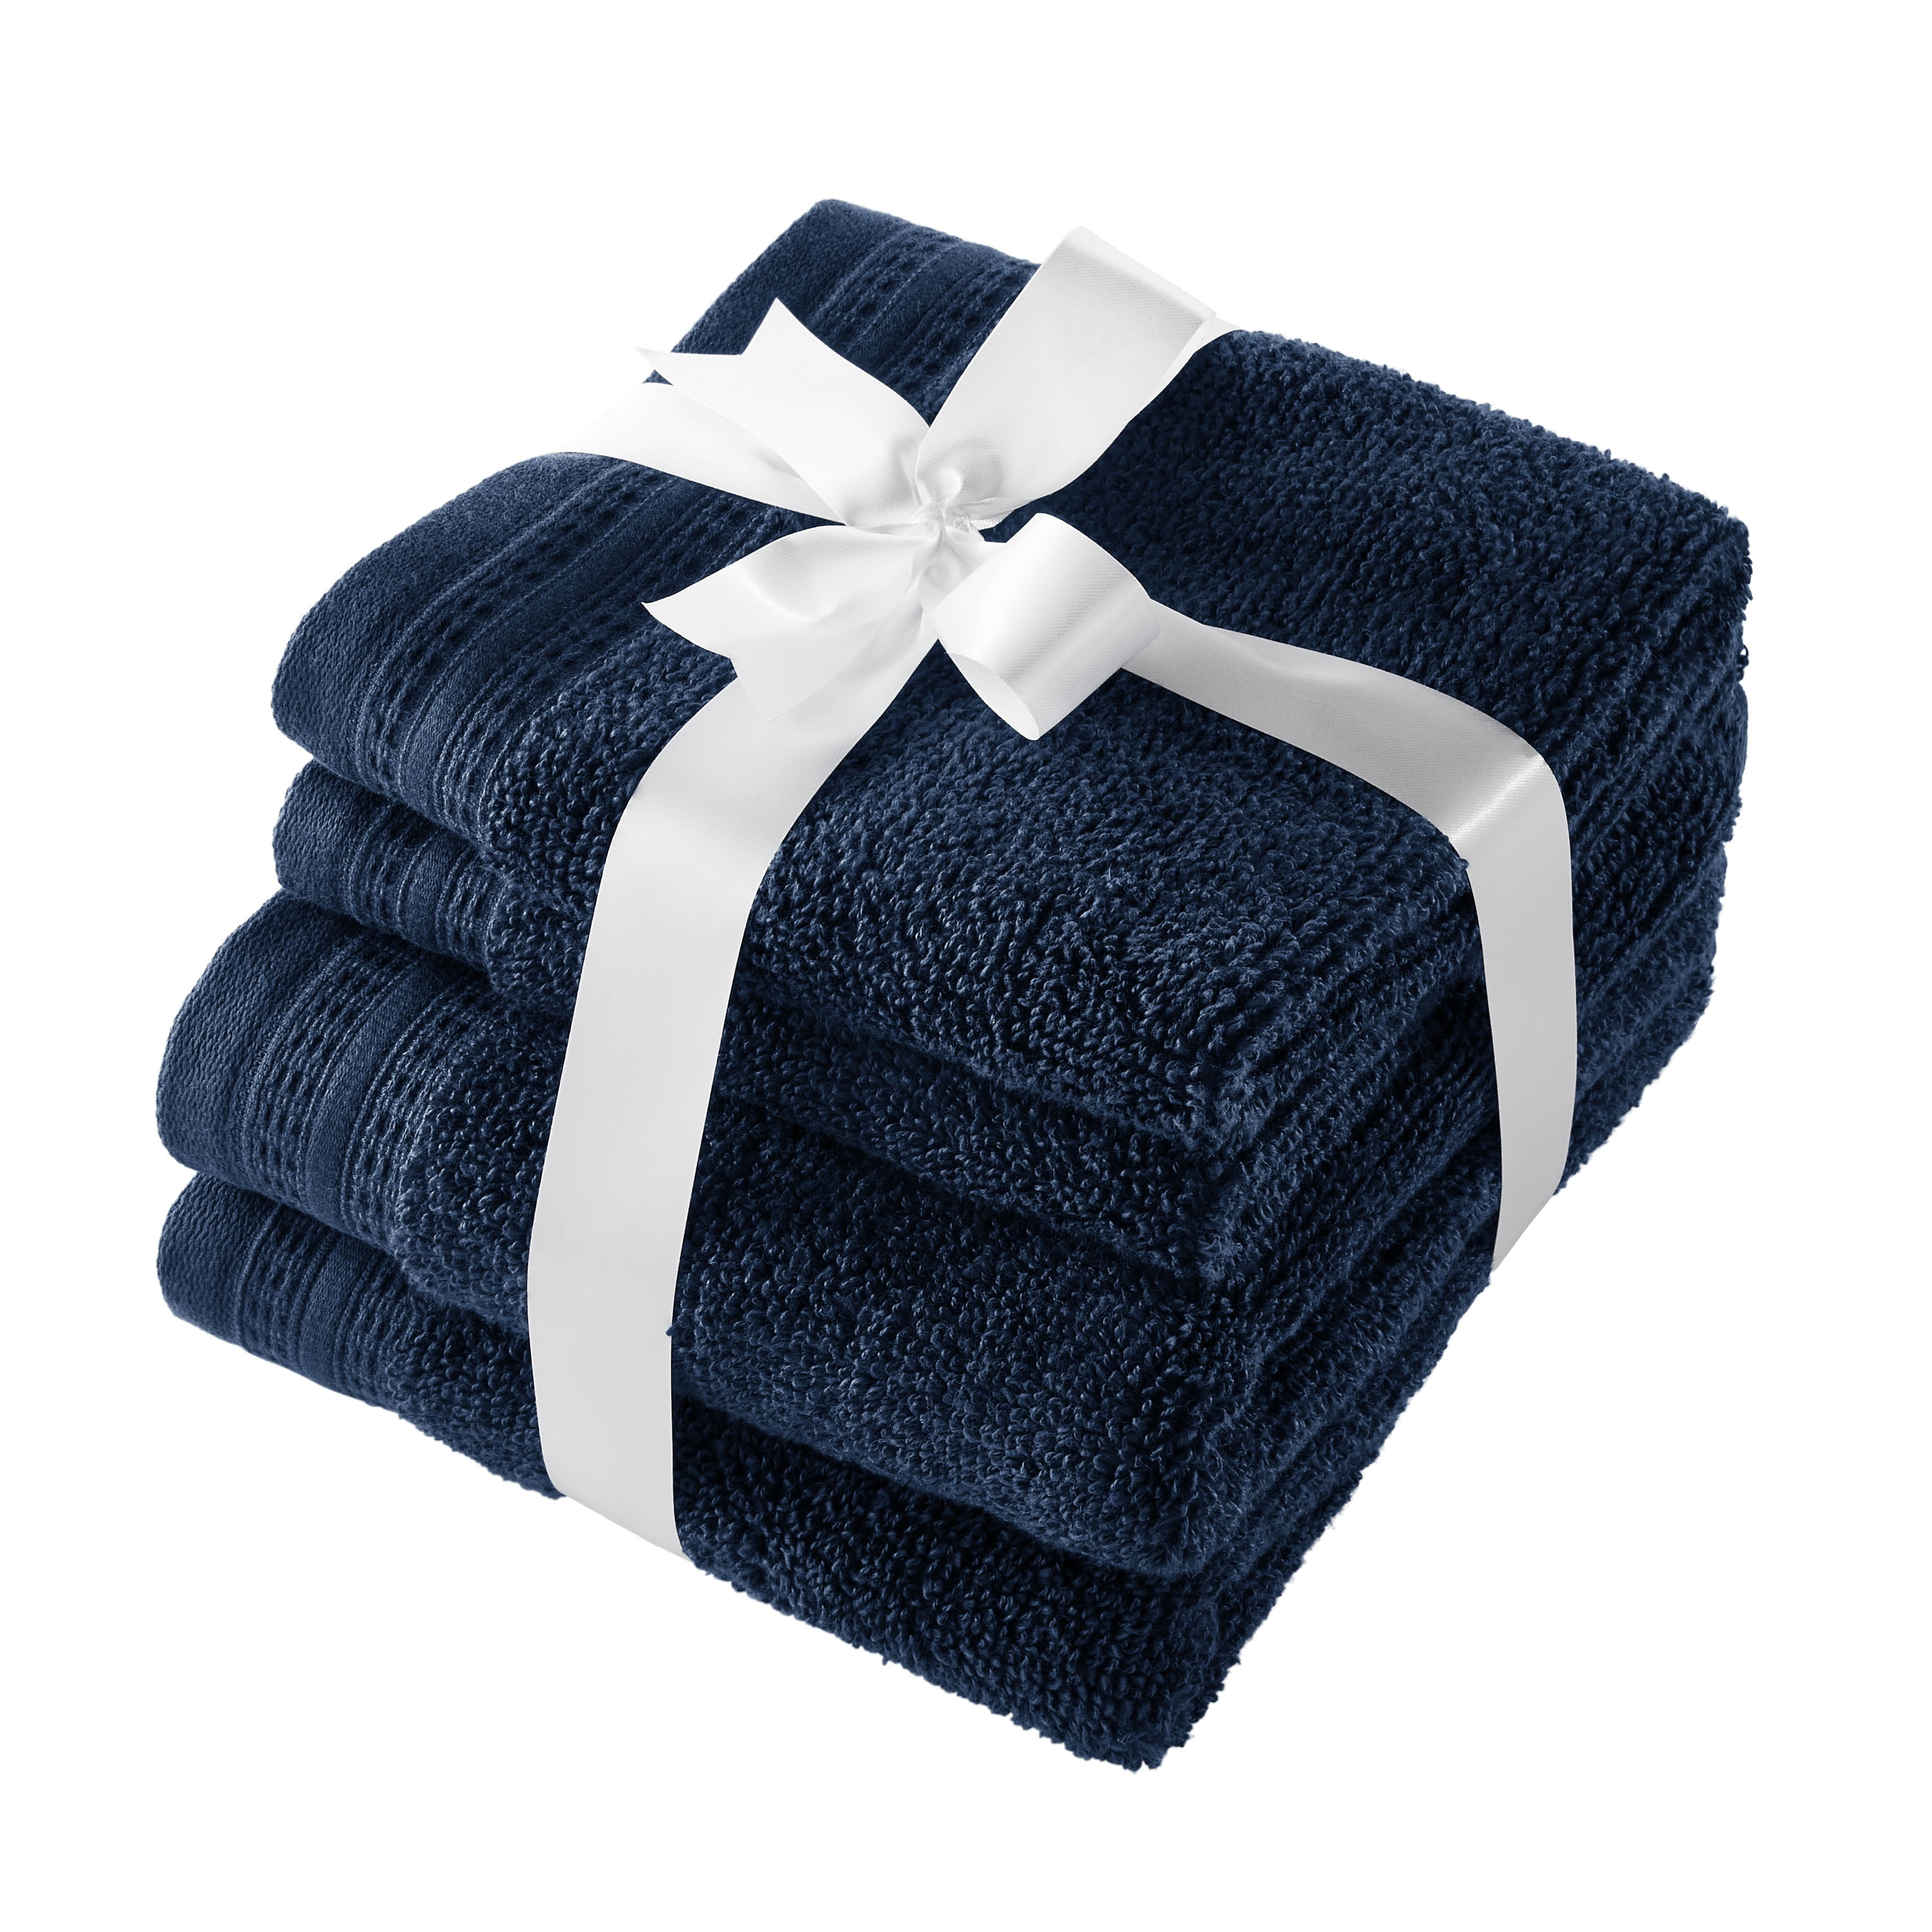 Purely Indulgent 4 Piece Cotton Hand Towel and Wash Cloth Set Blue